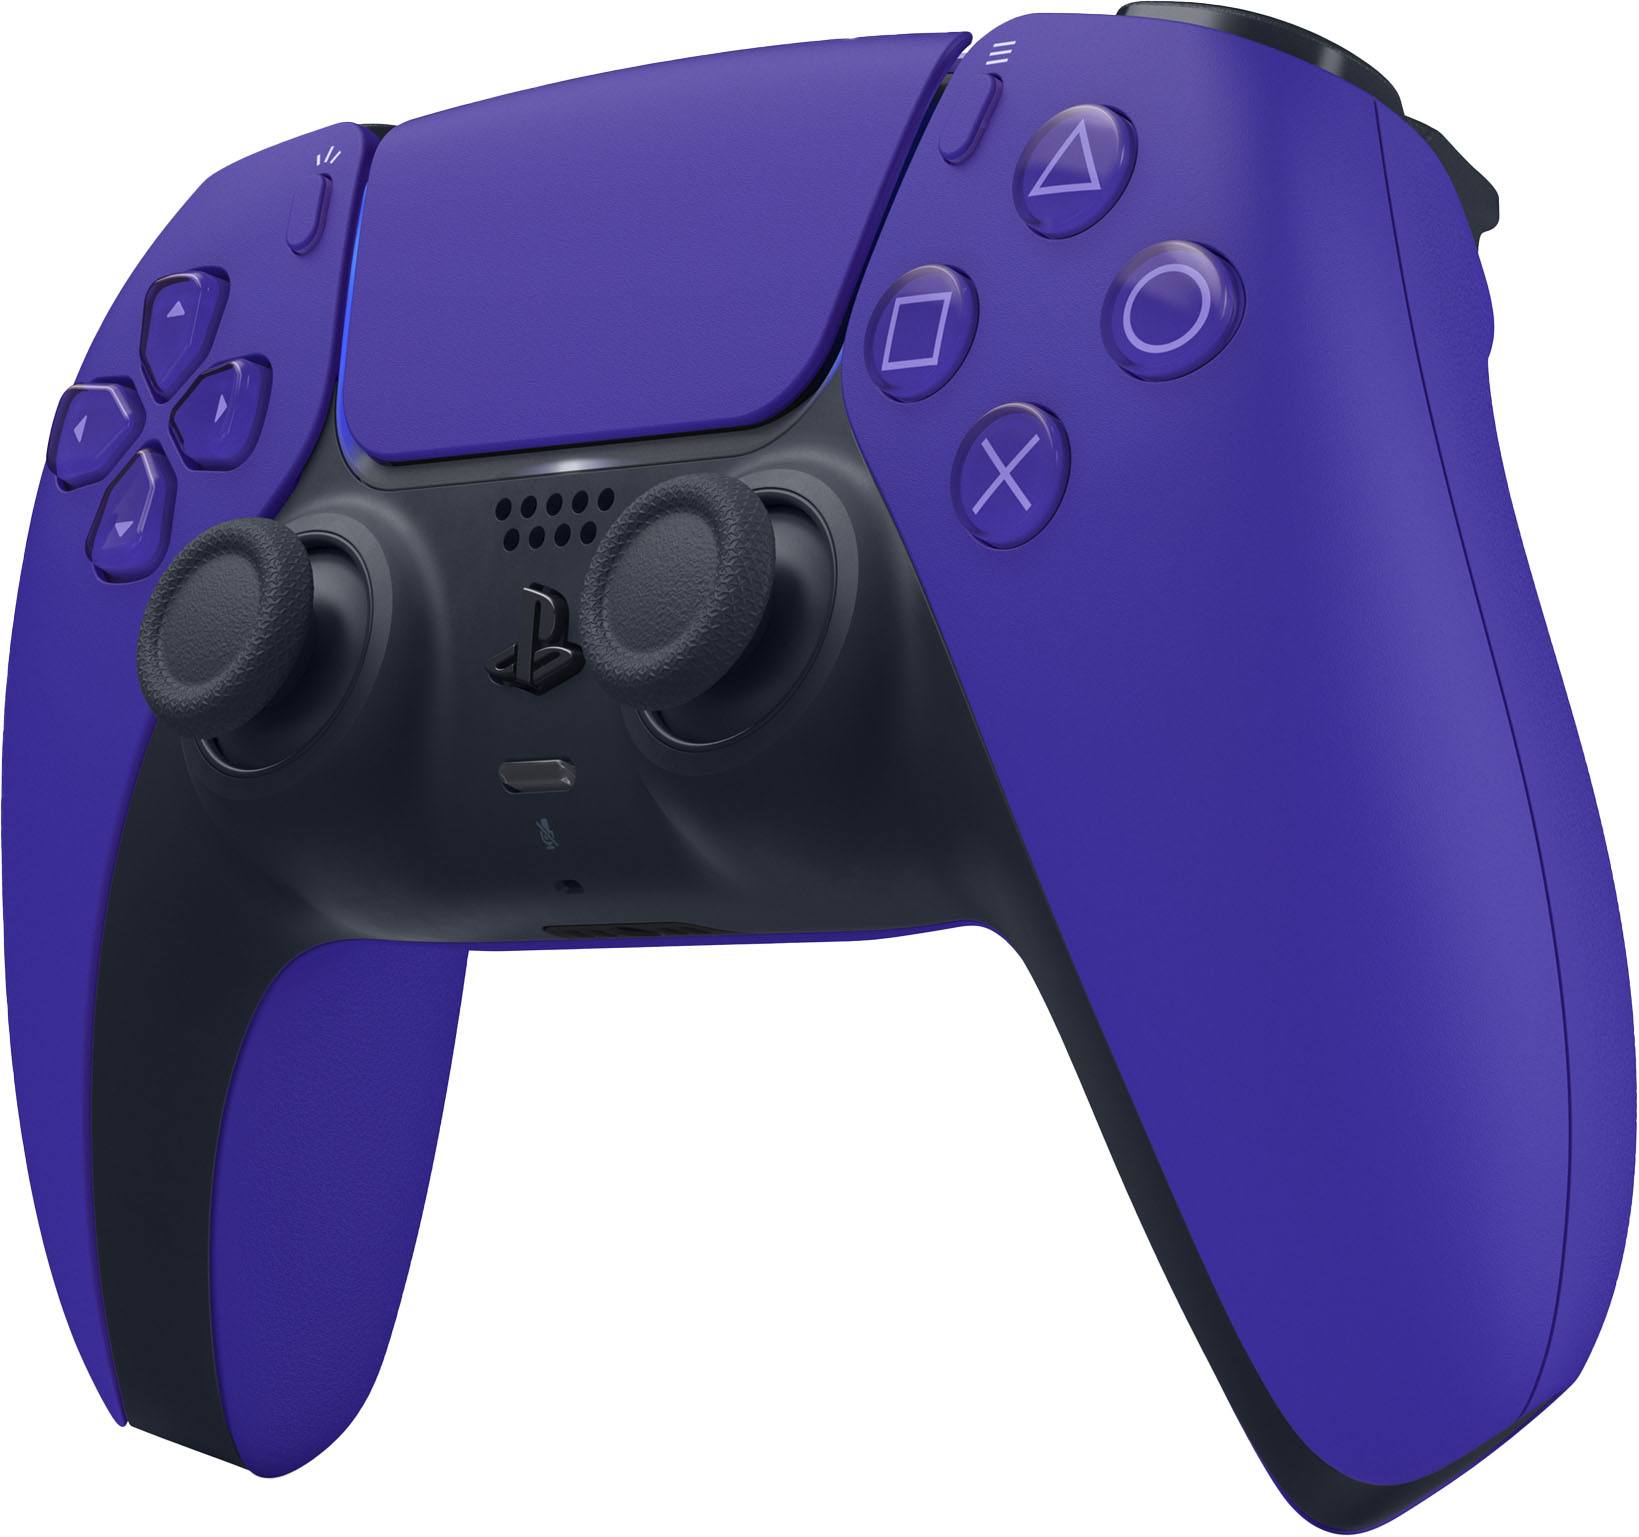 Wario64 on X: PS5 DualSense controller is $49.99 at Best Buy